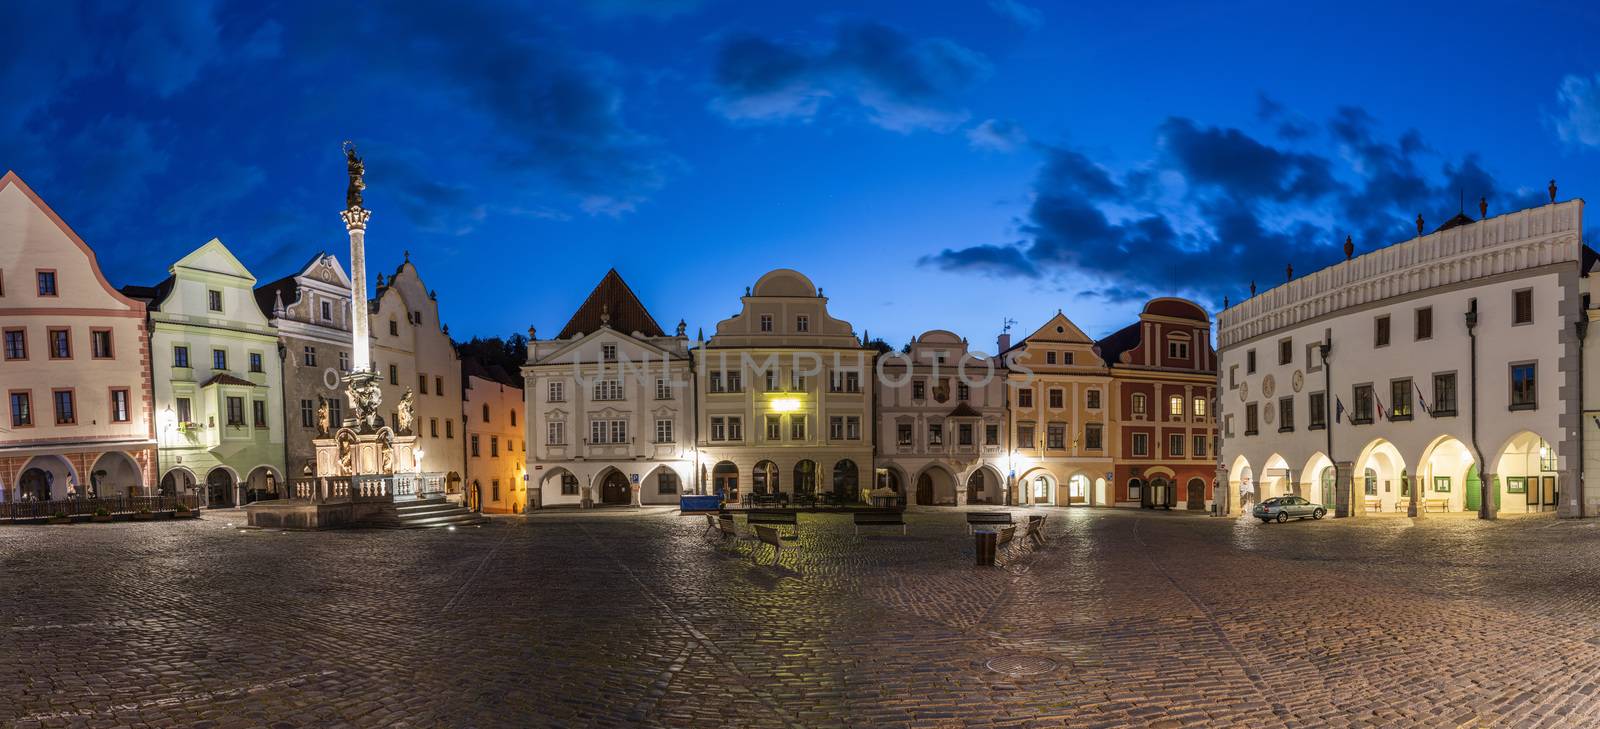 Empty town square in Cesky Krumlov early evening by fyletto